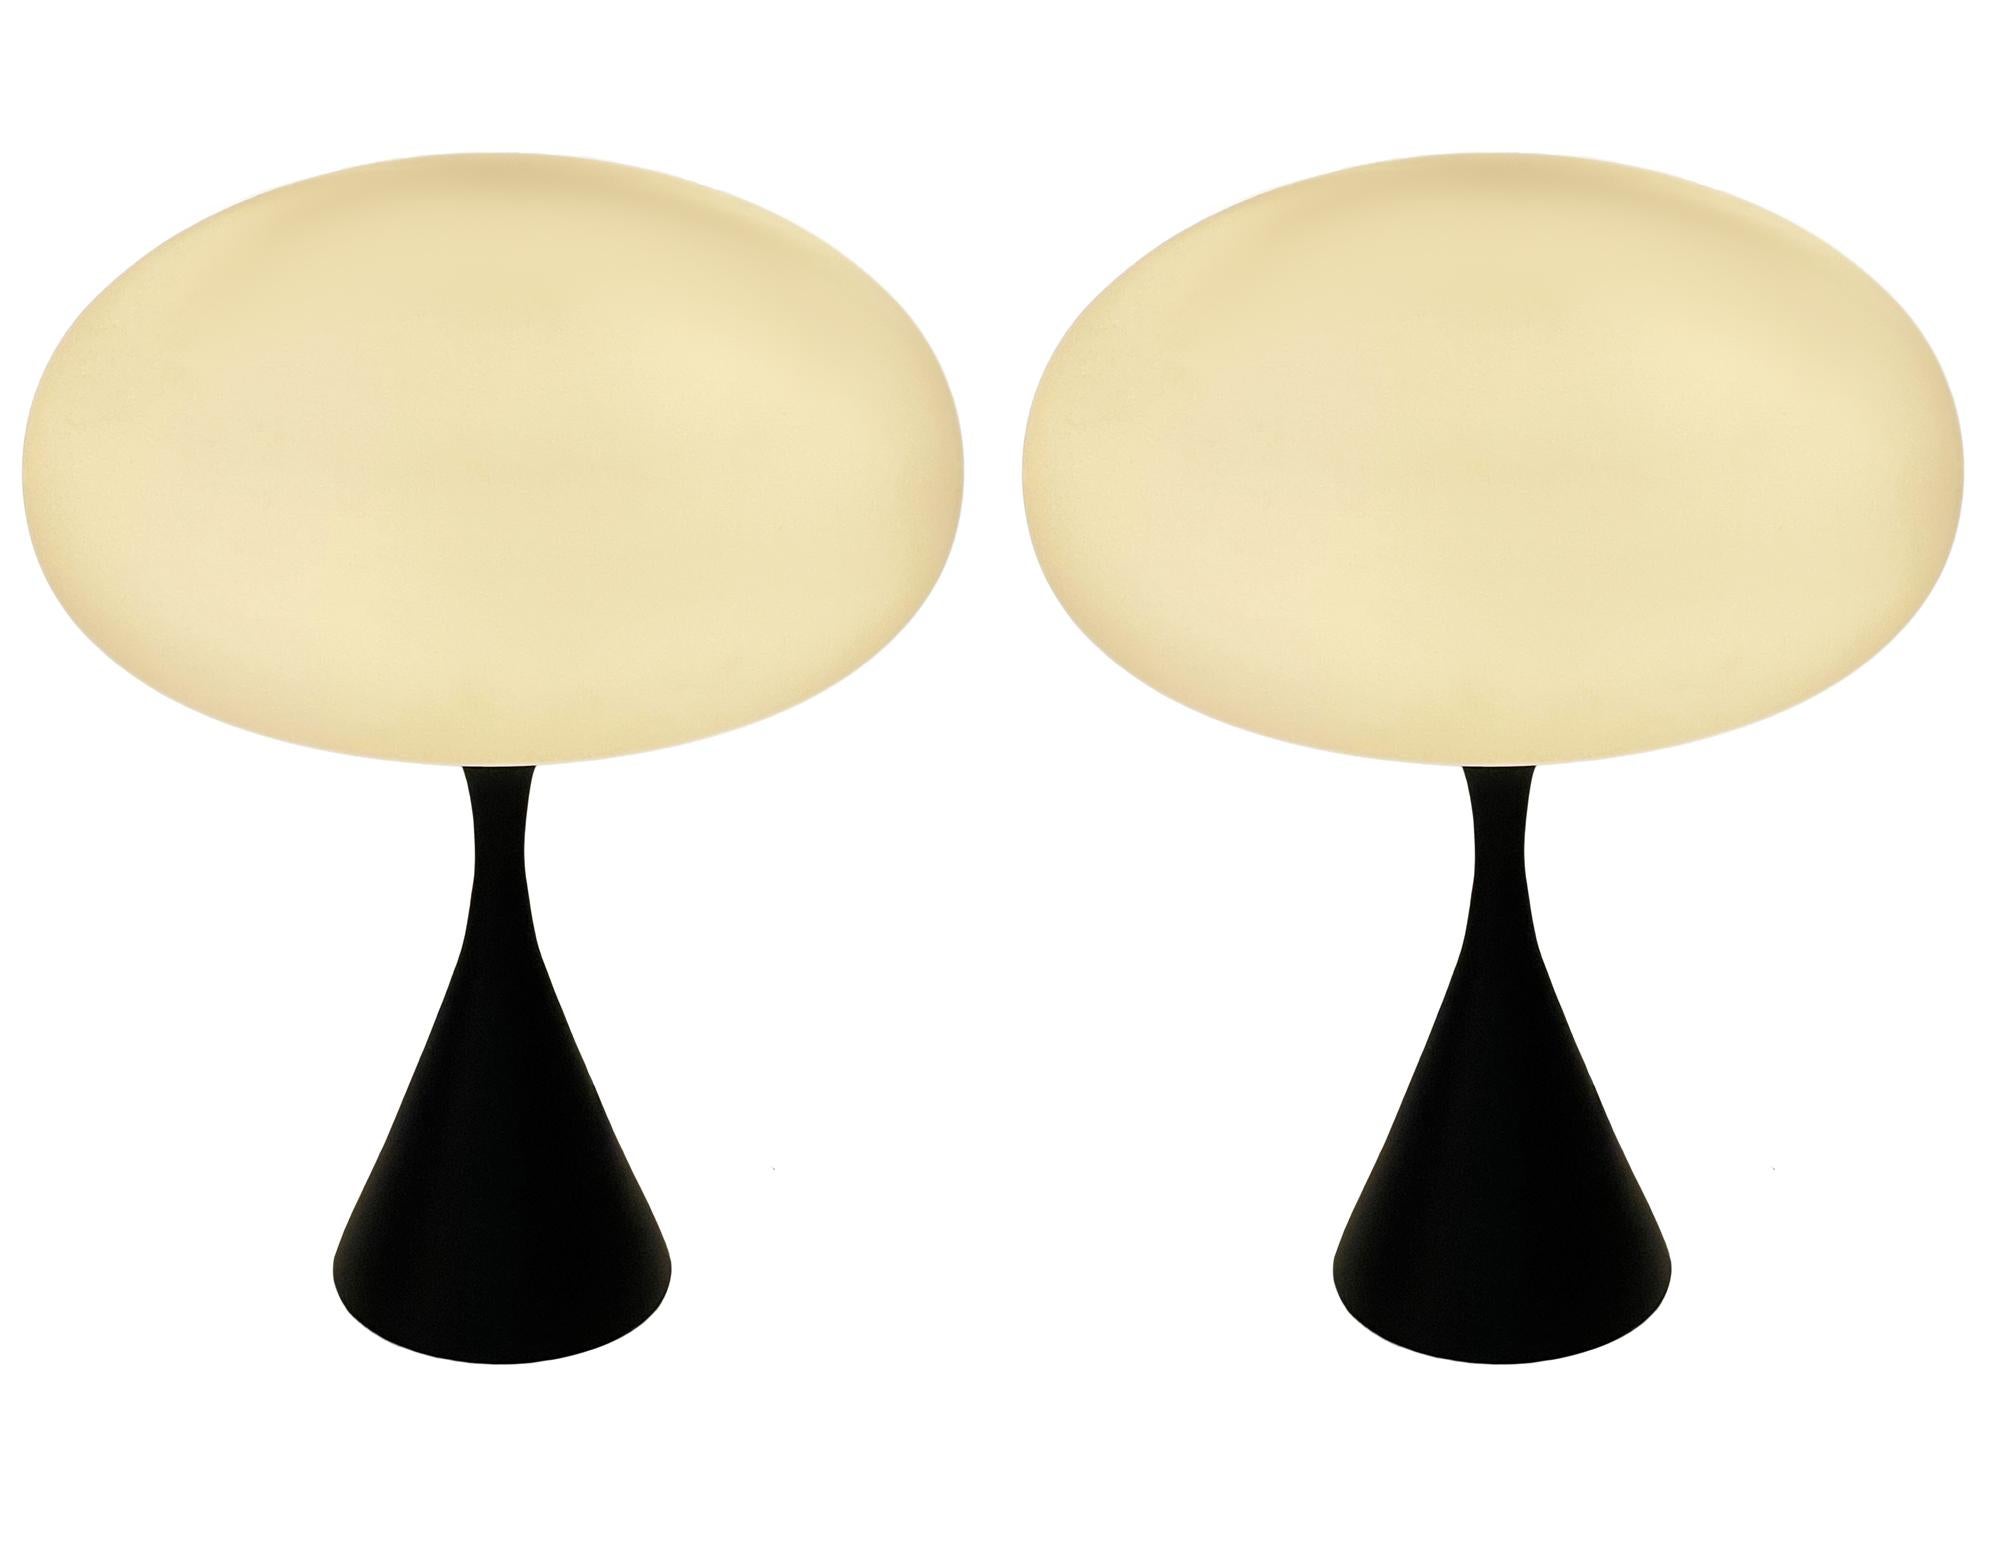 A handsome matching pair of table lamps in a conical mushroom form after Laurel Lamp Company. The lamp features a cast aluminum base with an black satin powder coat and a mouth blown frosted glass lamp shade. Price includes the pair as shown.